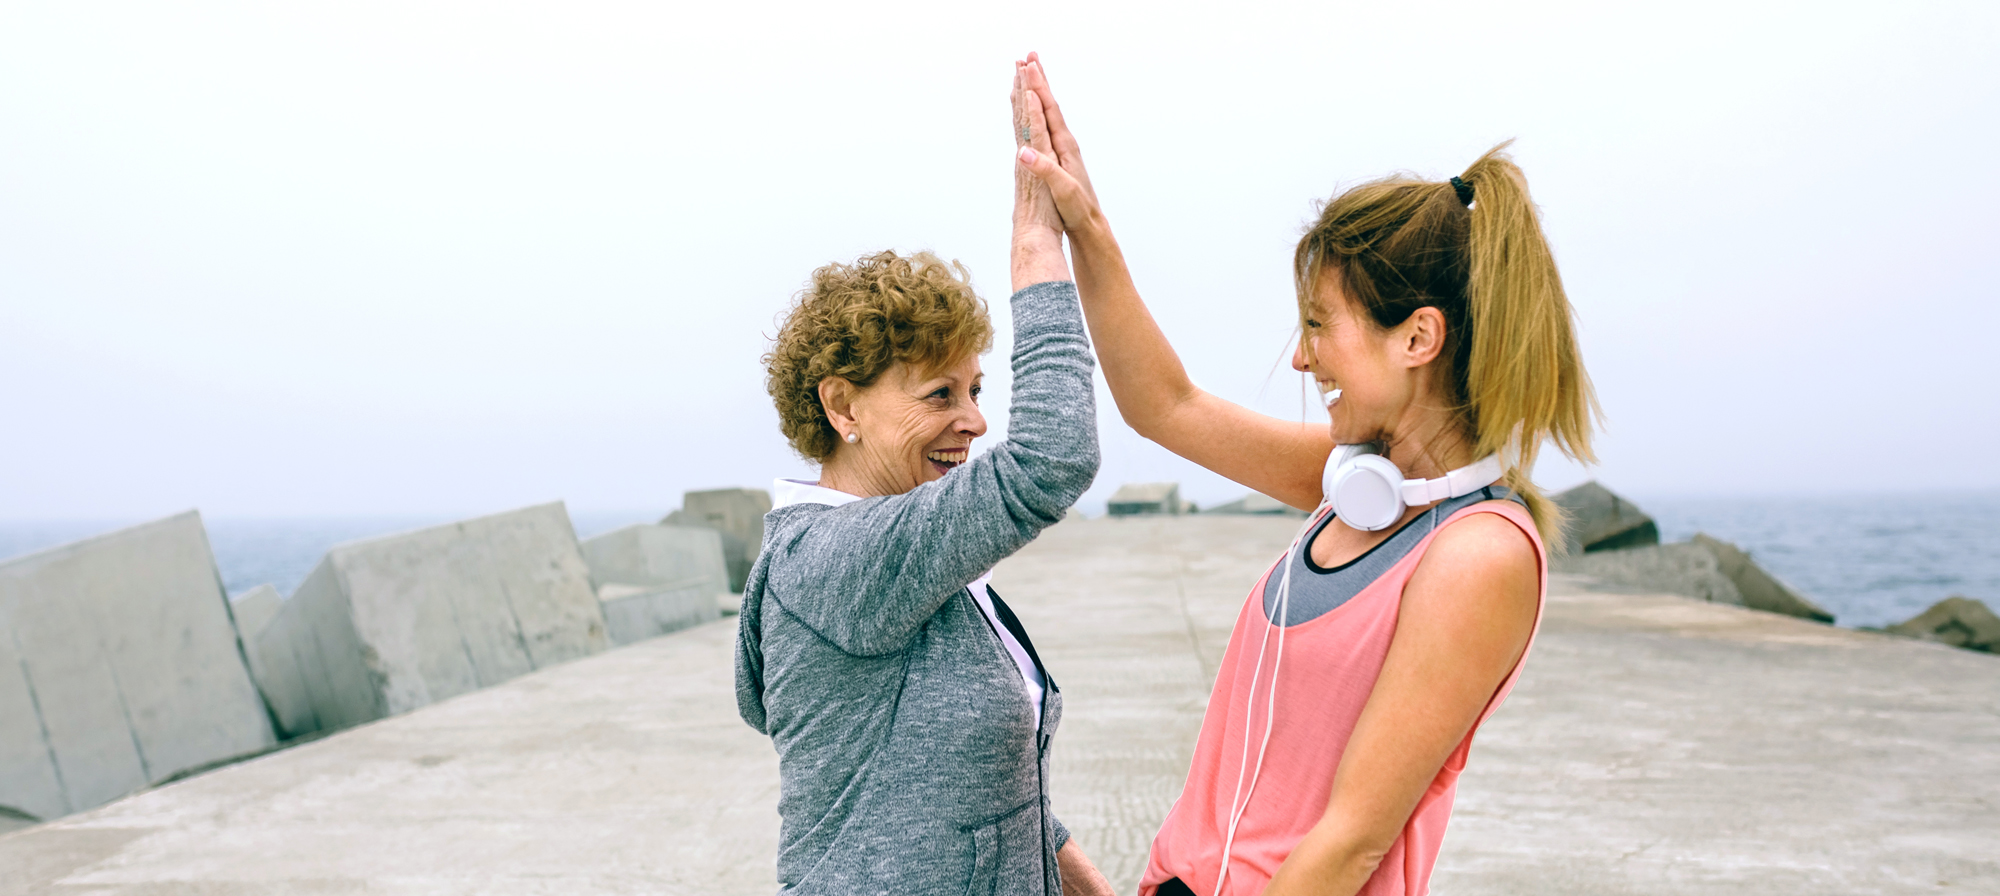 3 Ways to Stand Up to Ageism for a Healthy, Happy, Vital Life